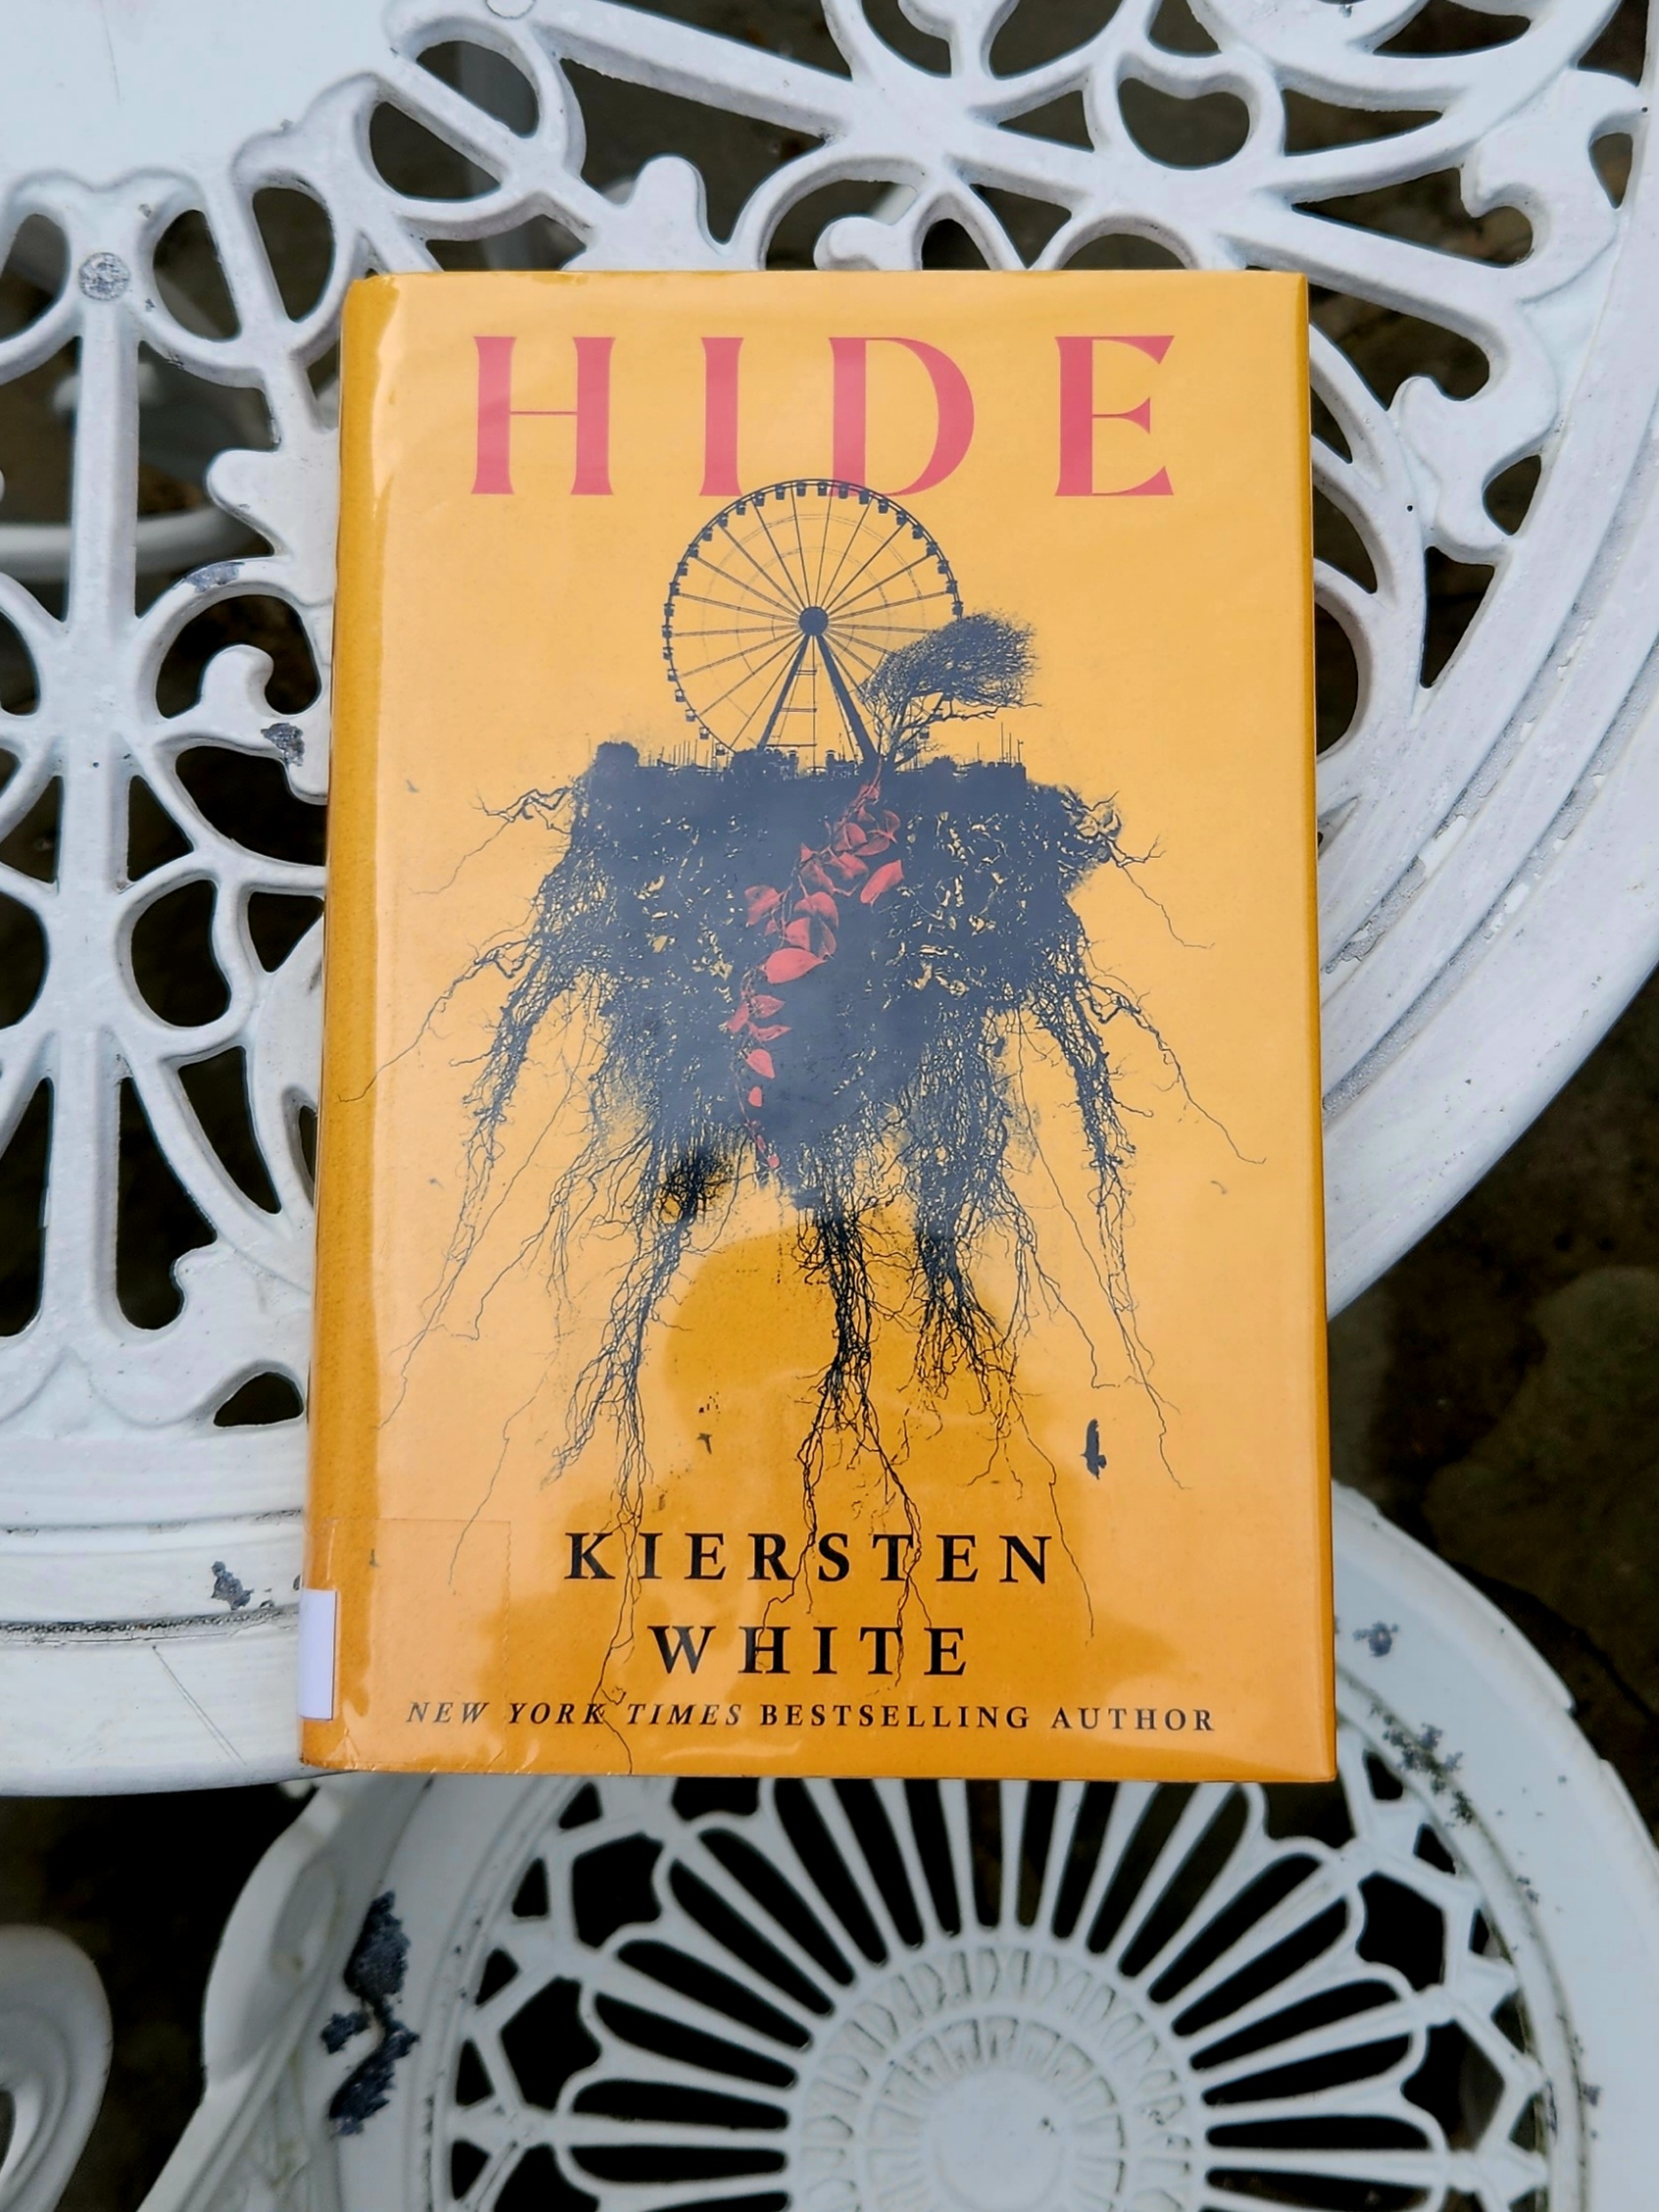 book cover of HIDE by kiersten white